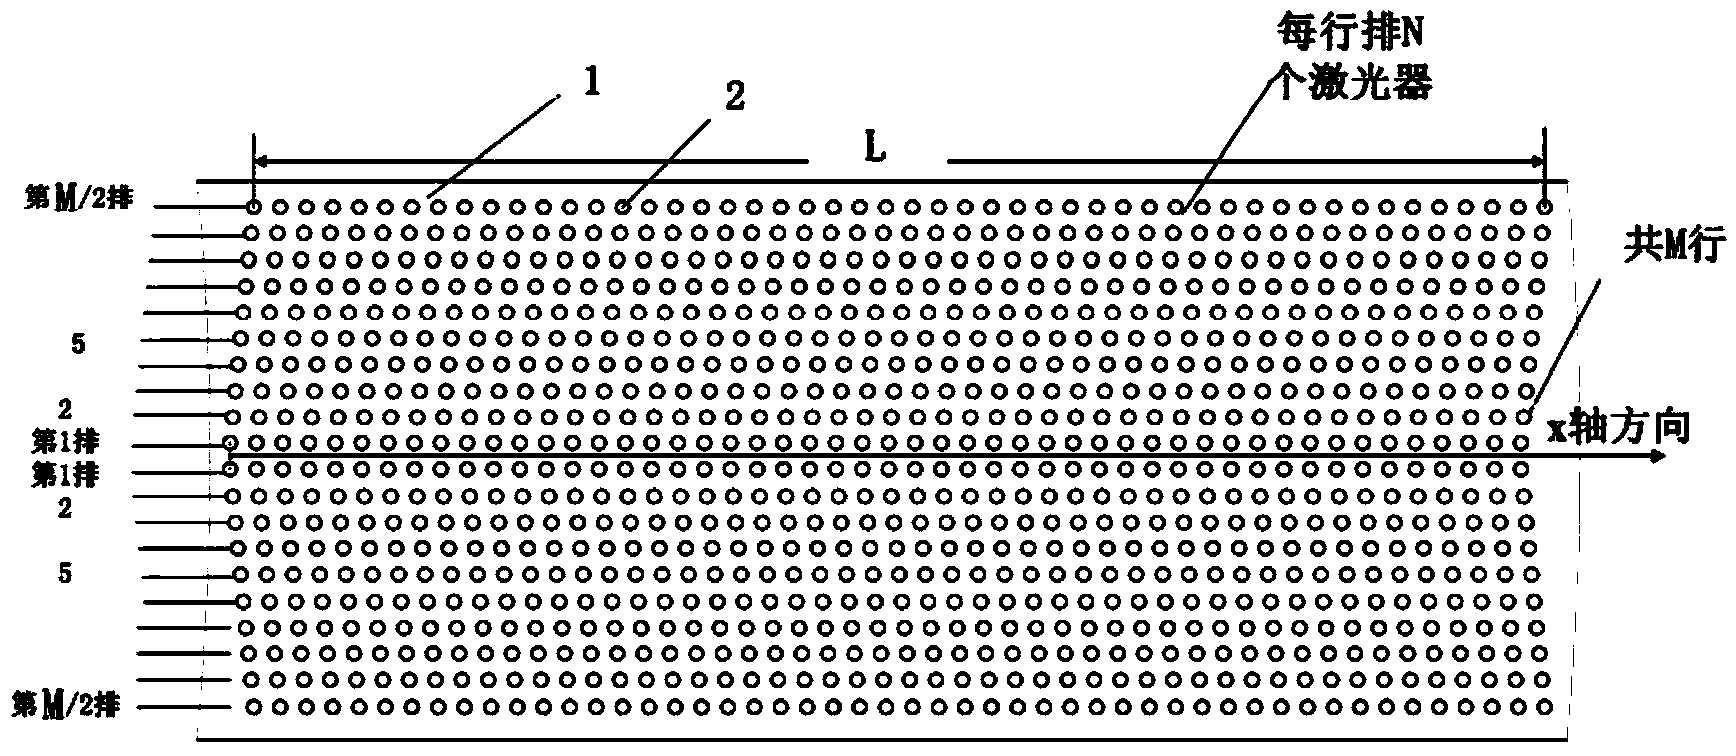 Complete-coverage laser lattice structure and method based on thermal burn weeding